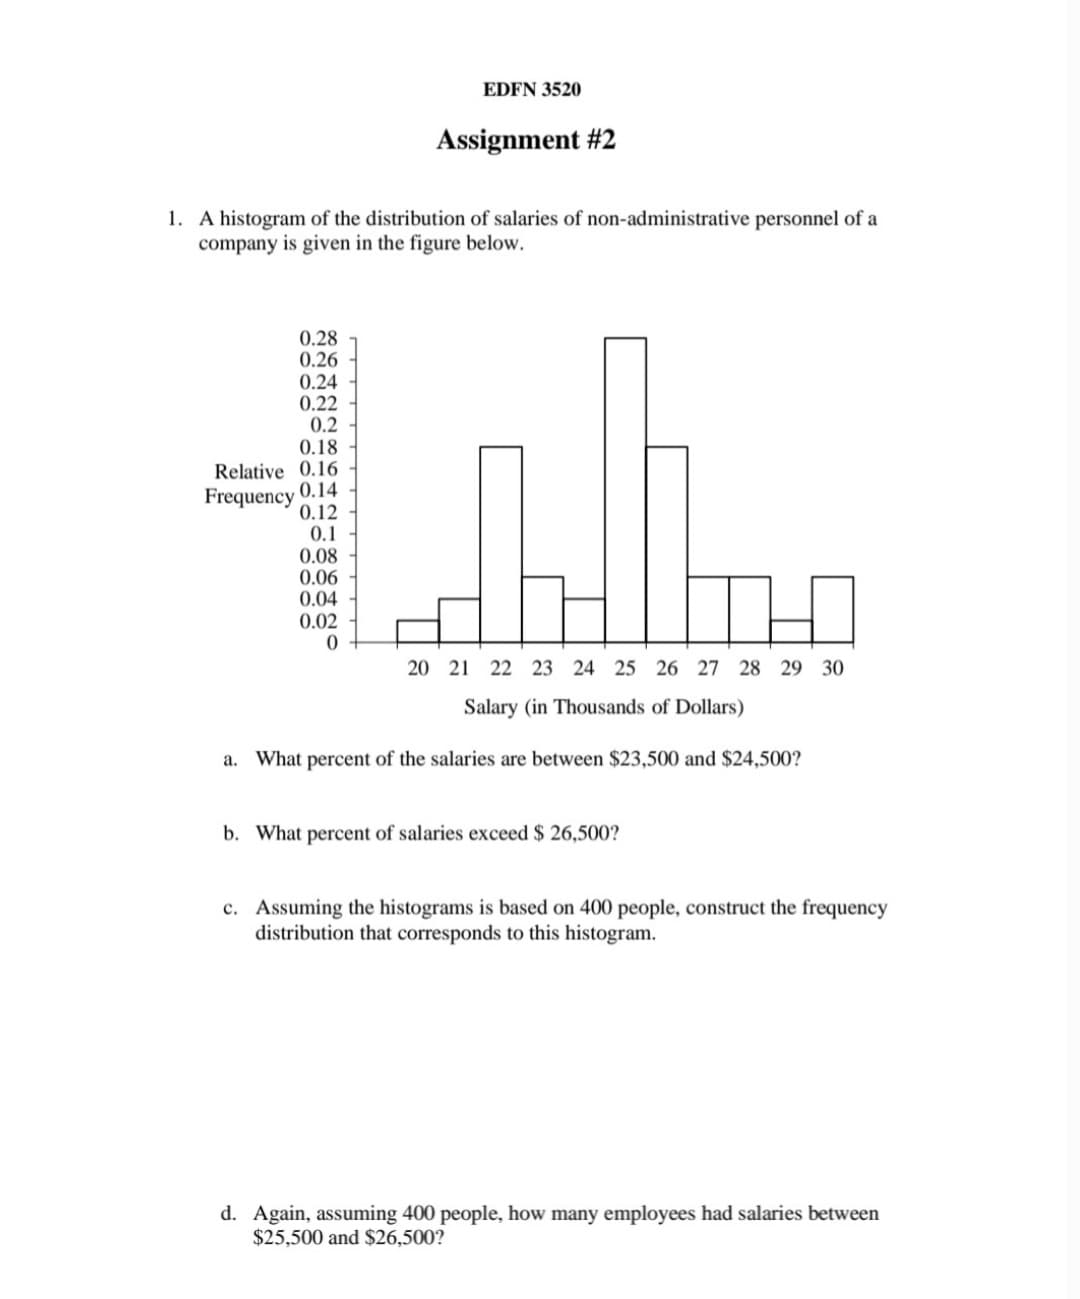 EDFN 3520
Assignment #2
1. A histogram of the distribution of salaries of non-administrative personnel of a
company is given in the figure below.
0.28
0.26
0.24
0.22
0.2
0.18
Relative 0.16
0.14
Frequency
0.12
0.1
0.08
0.06
0.04
0.02
20 21 22 23 24 25 26 27 28 29 30
Salary (in Thousands of Dollars)
а.
What percent of the salaries are between $23,500 and $24,500?
b. What percent of salaries exceed $ 26,500?
c. Assuming the histograms is based on 400 people, construct the frequency
distribution that corresponds to this histogram.
d. Again, assuming 400 people, how many employees had salaries between
$25,500 and $26,500?
TTT TTT TTT TT
